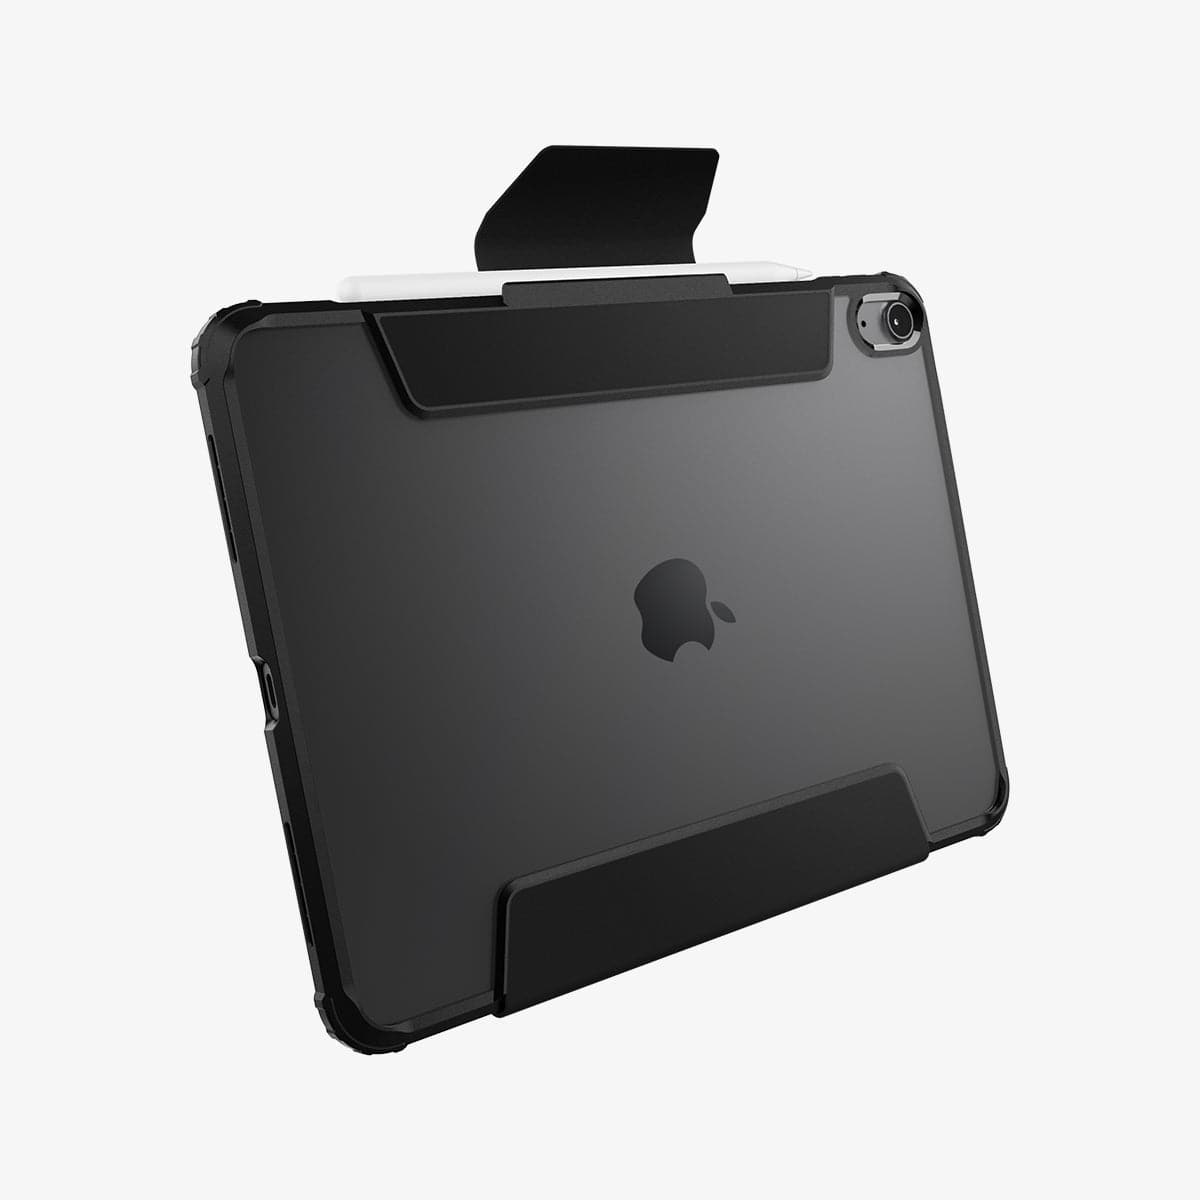 ACS02697 - iPad Air 10.9" (2022 / 2020) Case Ultra Hybrid Pro in black showing the back and bottom with cover flap open